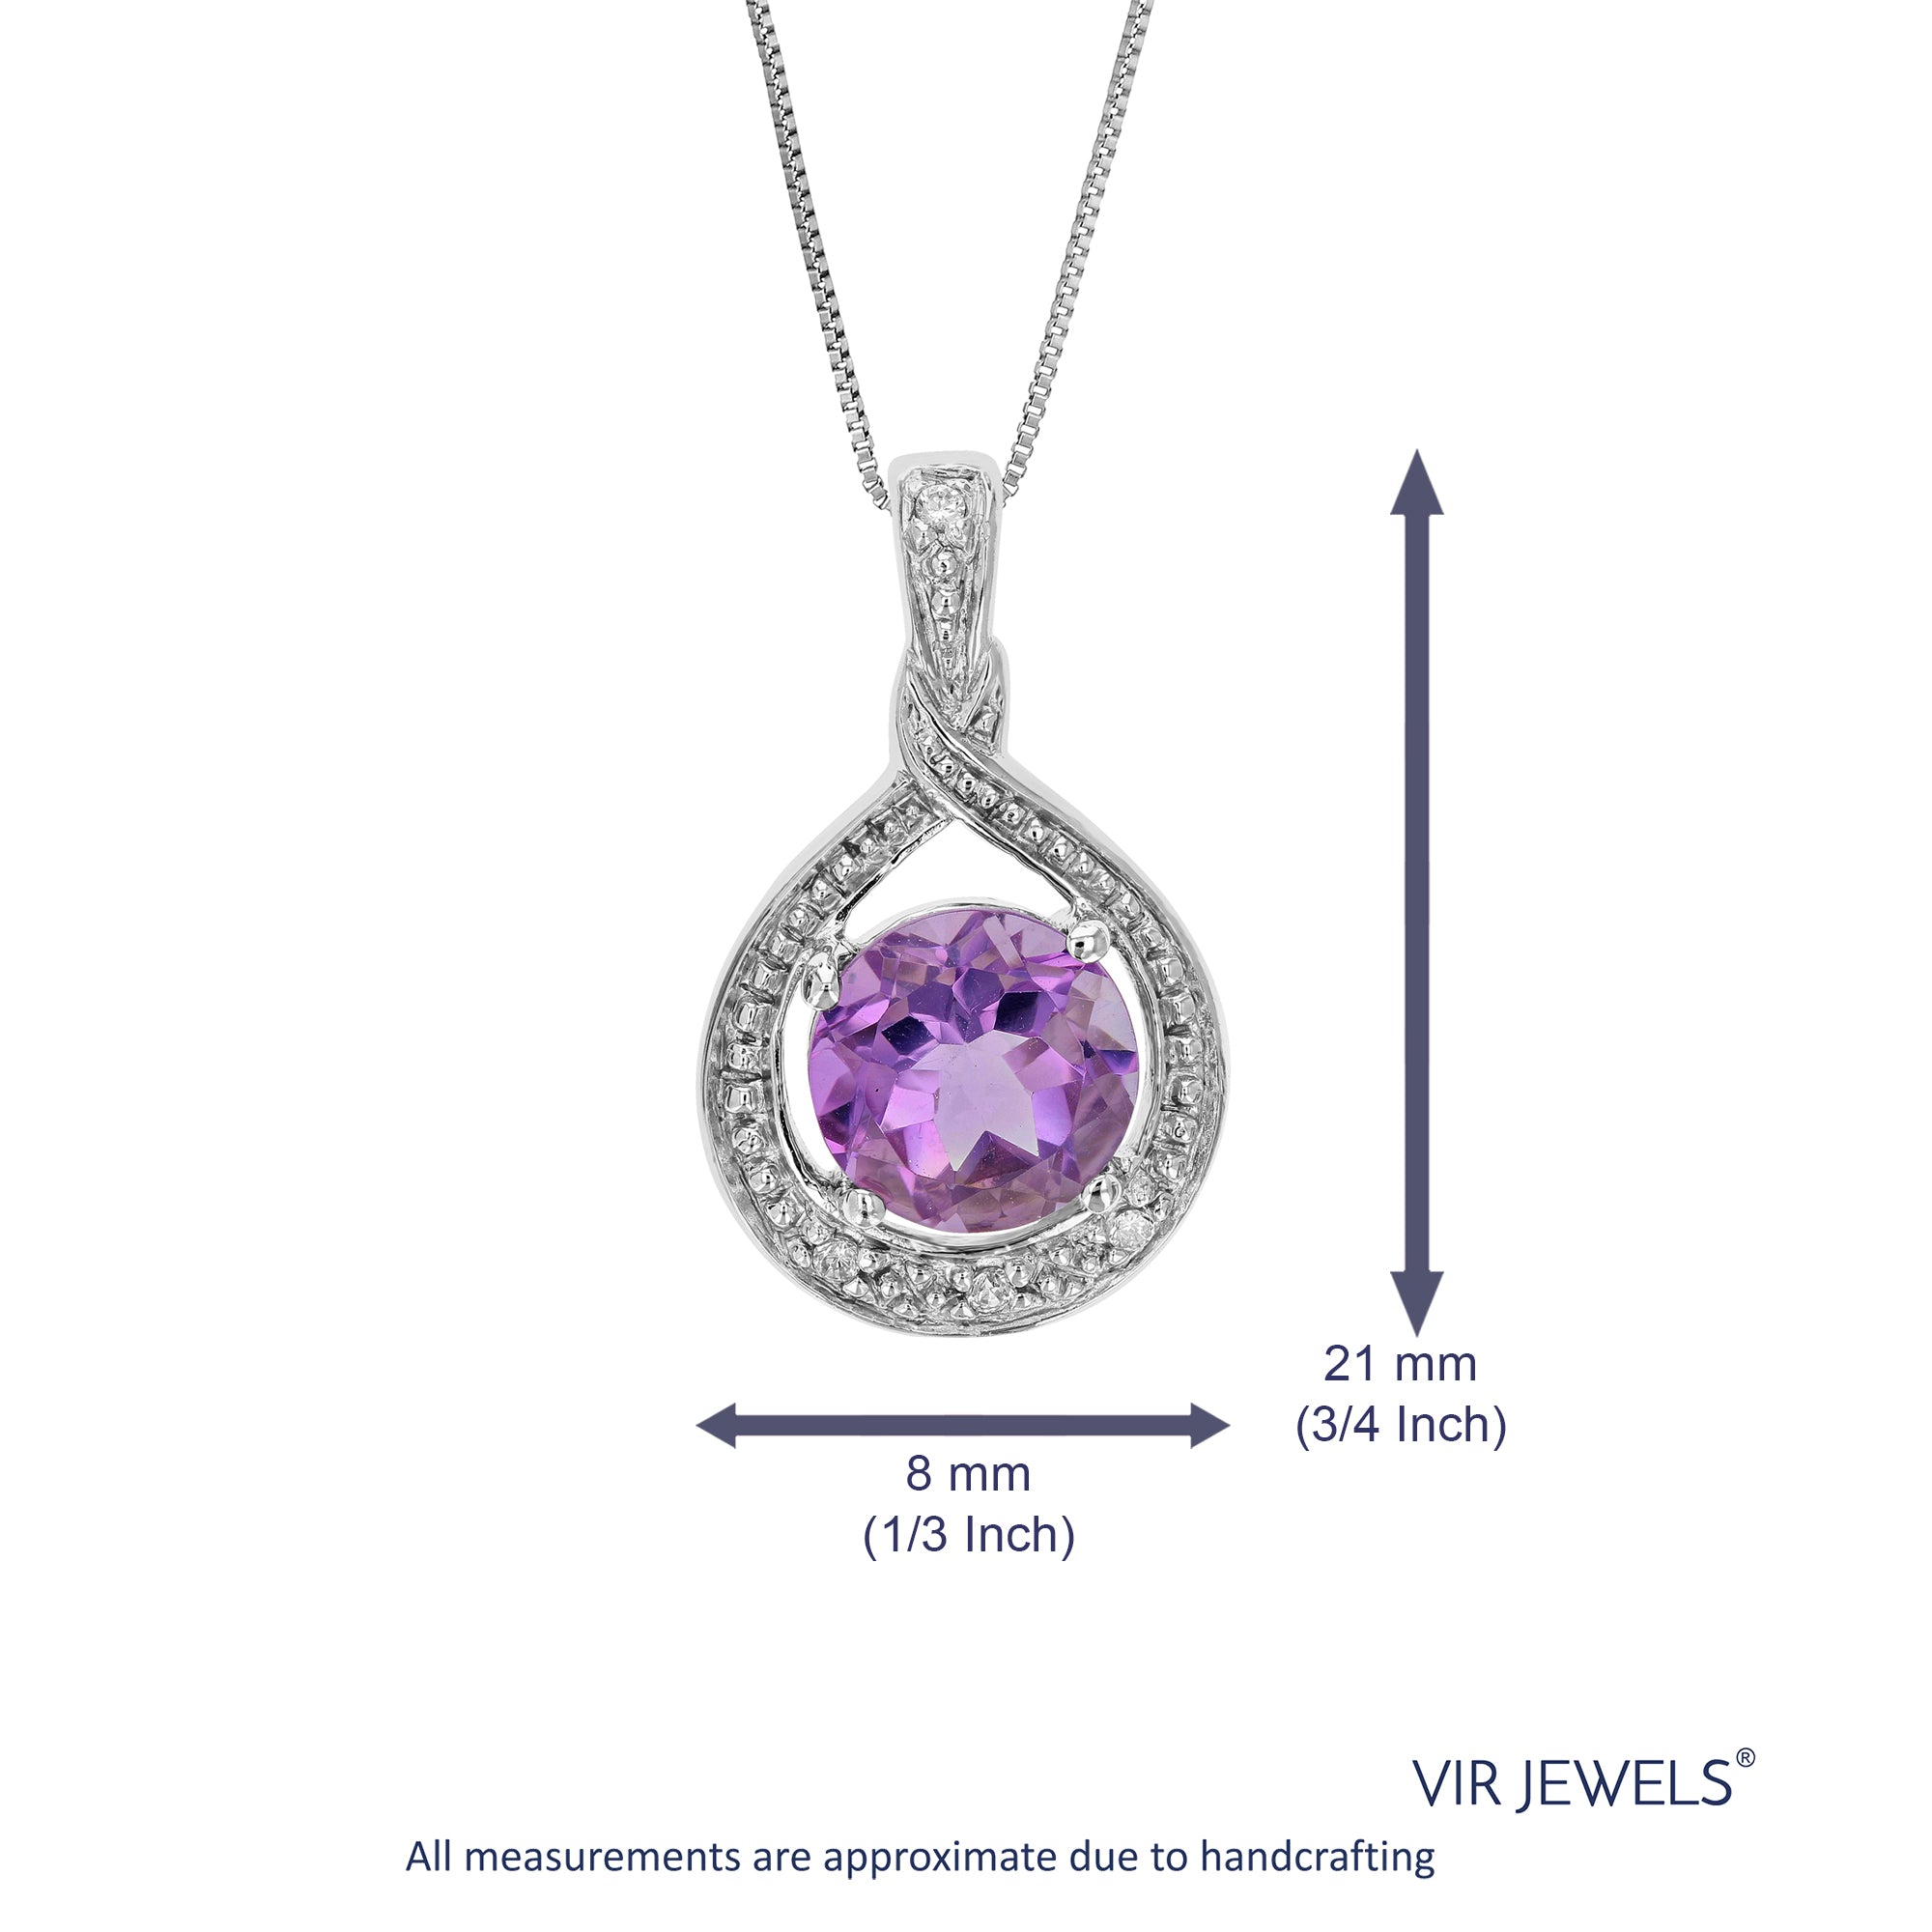 1.25 cttw Pendant Necklace, Purple Amethyst Pendant Necklace for Women in .925 Sterling Silver with Rhodium, 18 Inch Chain, Prong Setting